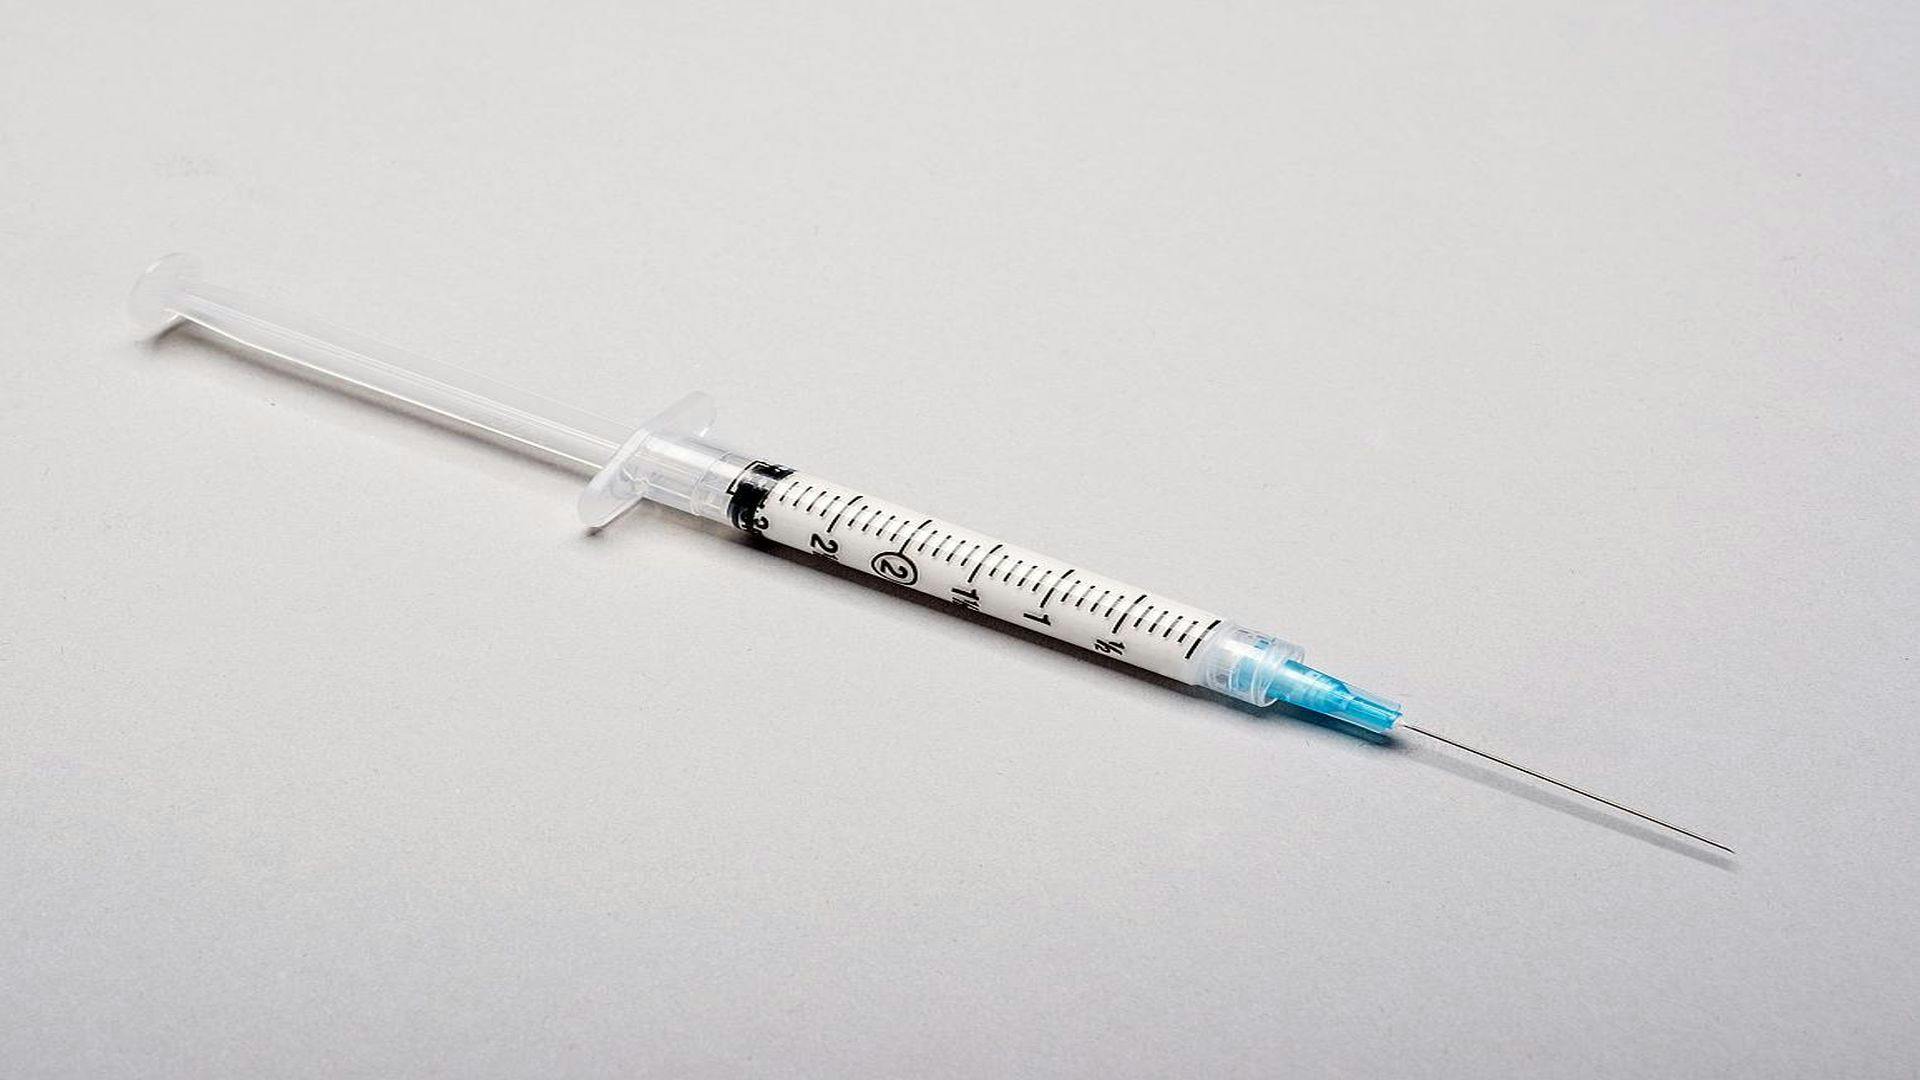 Study to Test Efficacy, Safety of Injectable Cabotegravir Compared With Daily Oral PrEP